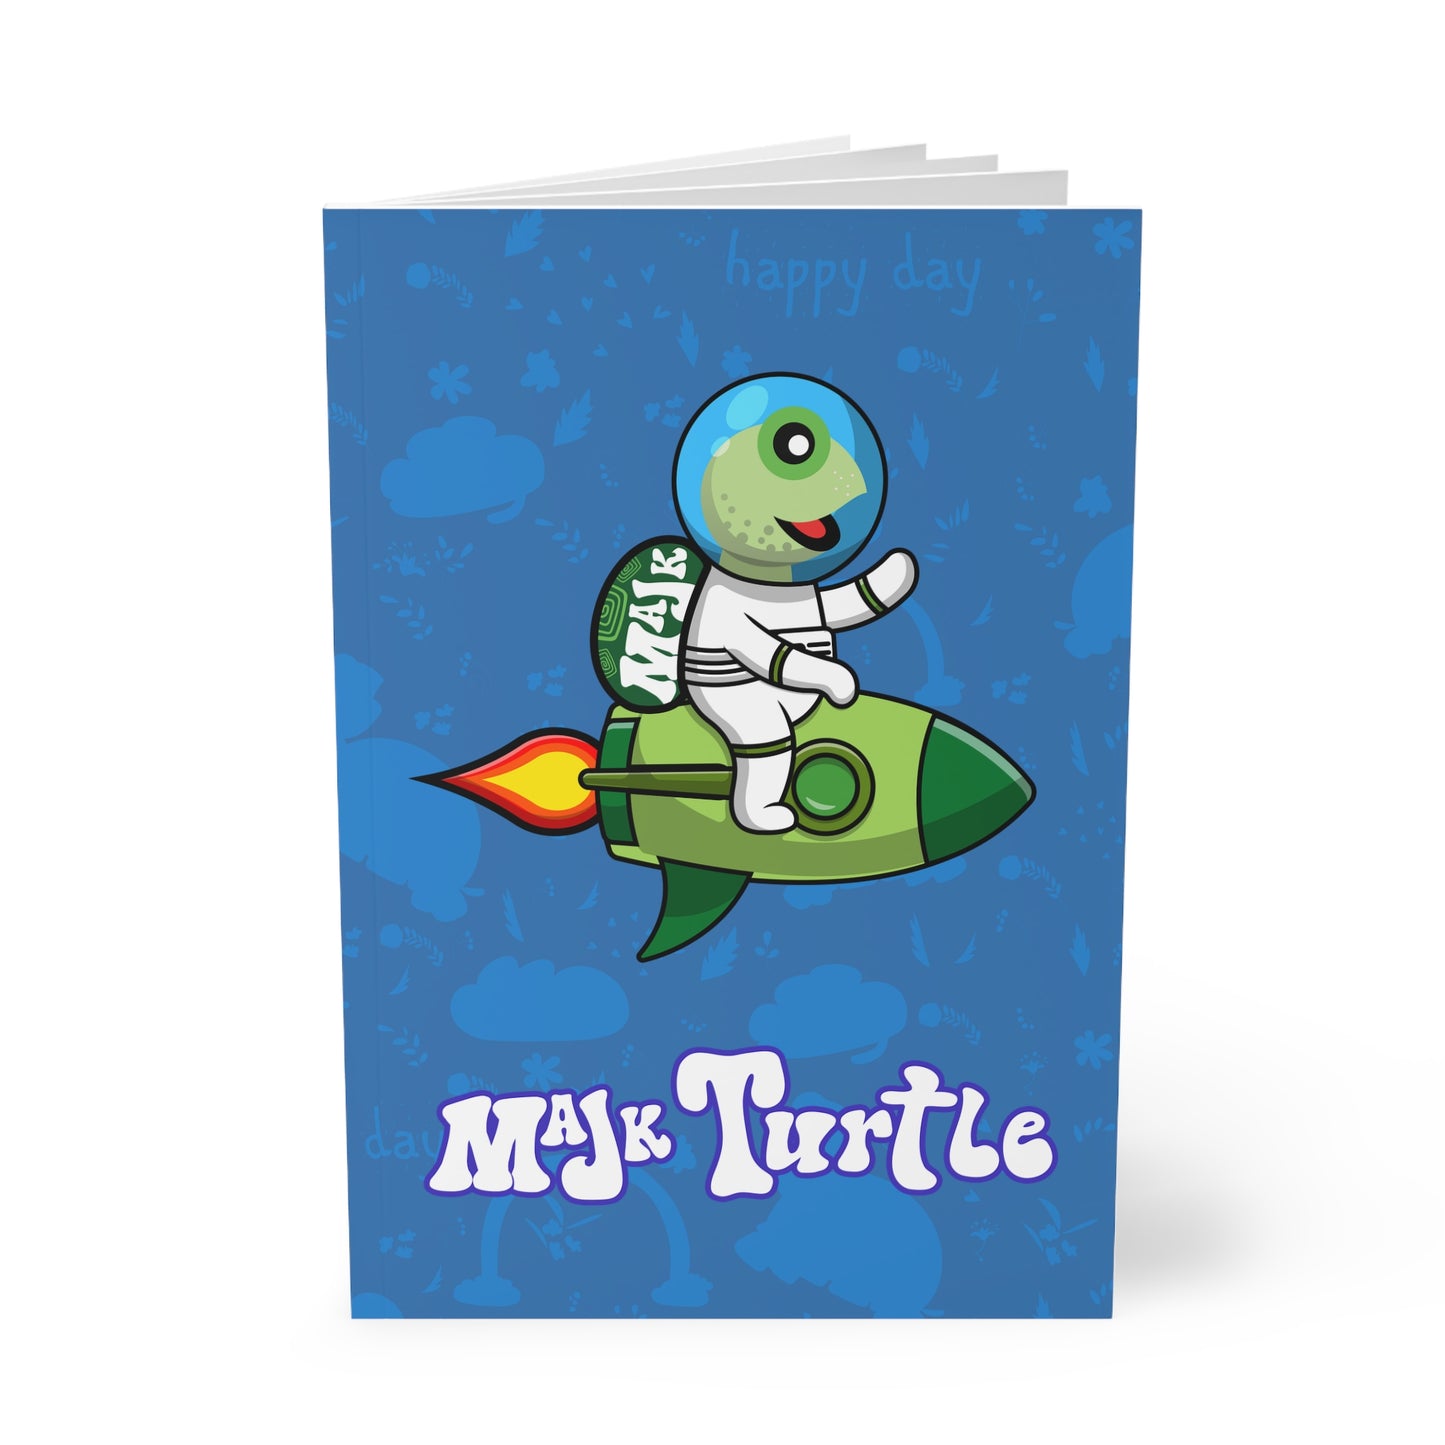 Softcover Notebook "Rocket Turtle"